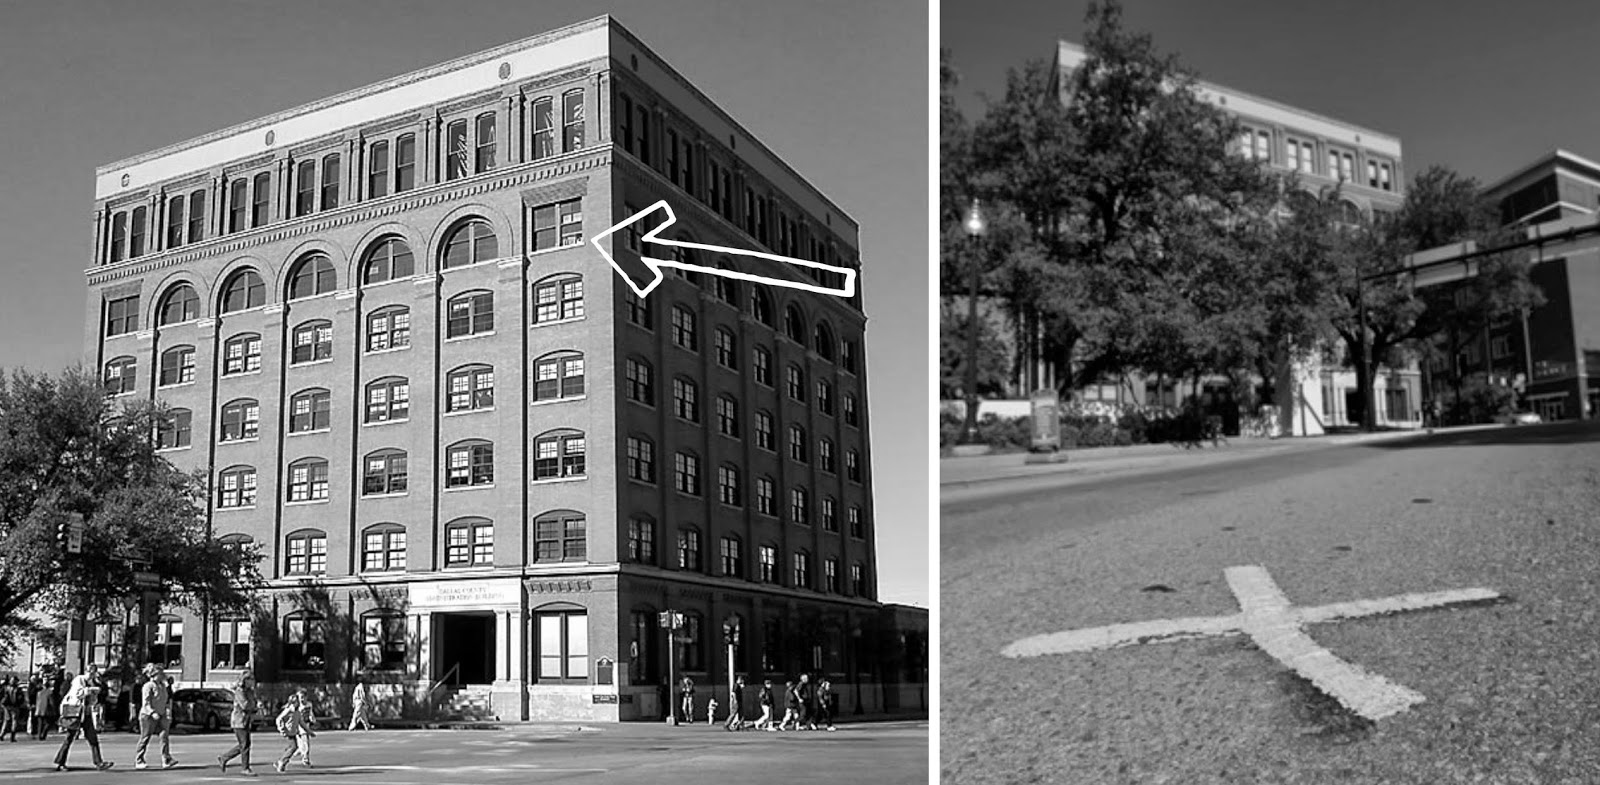 Dallas School Book Depository Building – Left – Arrow pointing to the window in which the shots were fired. Right – The “X” showing where the President was hit with open window in the book depository.